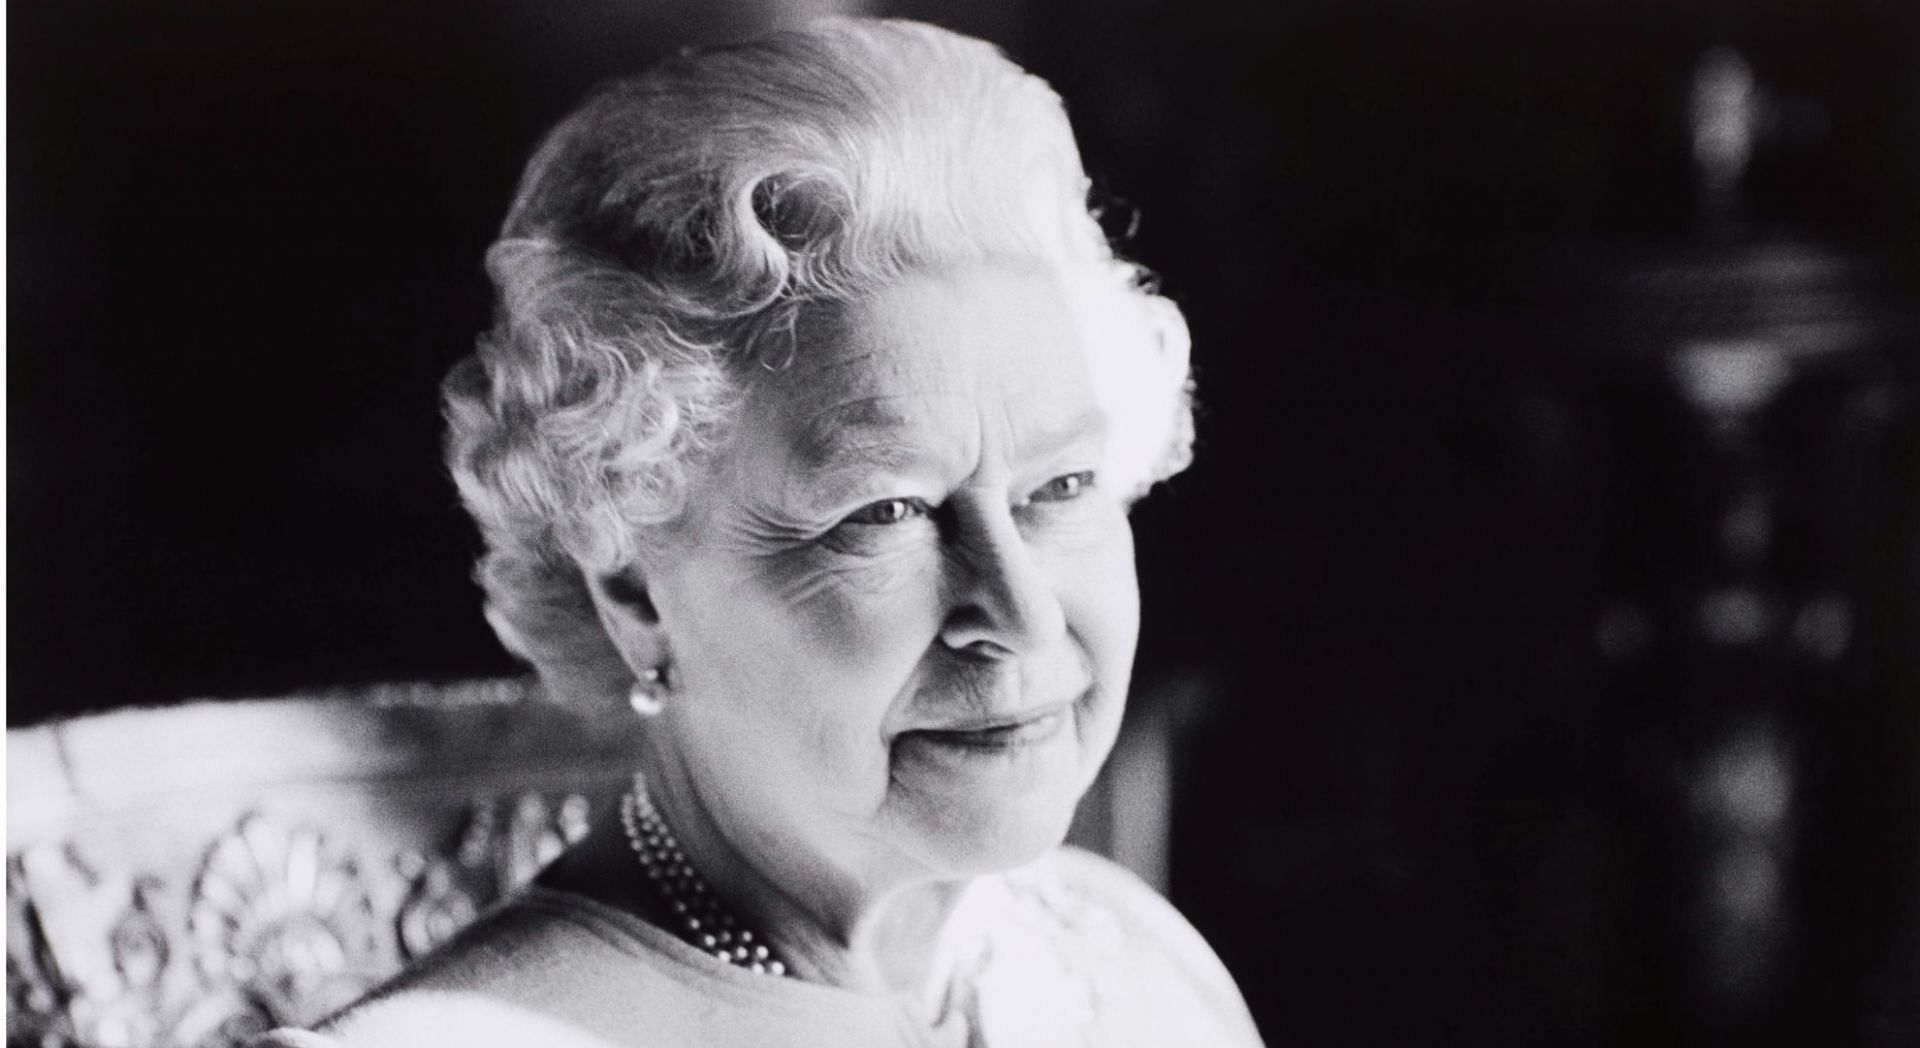 Queen Elizabeth II passed away on September 8 at the age of 96 (Image via The Royal Family/Twitter)